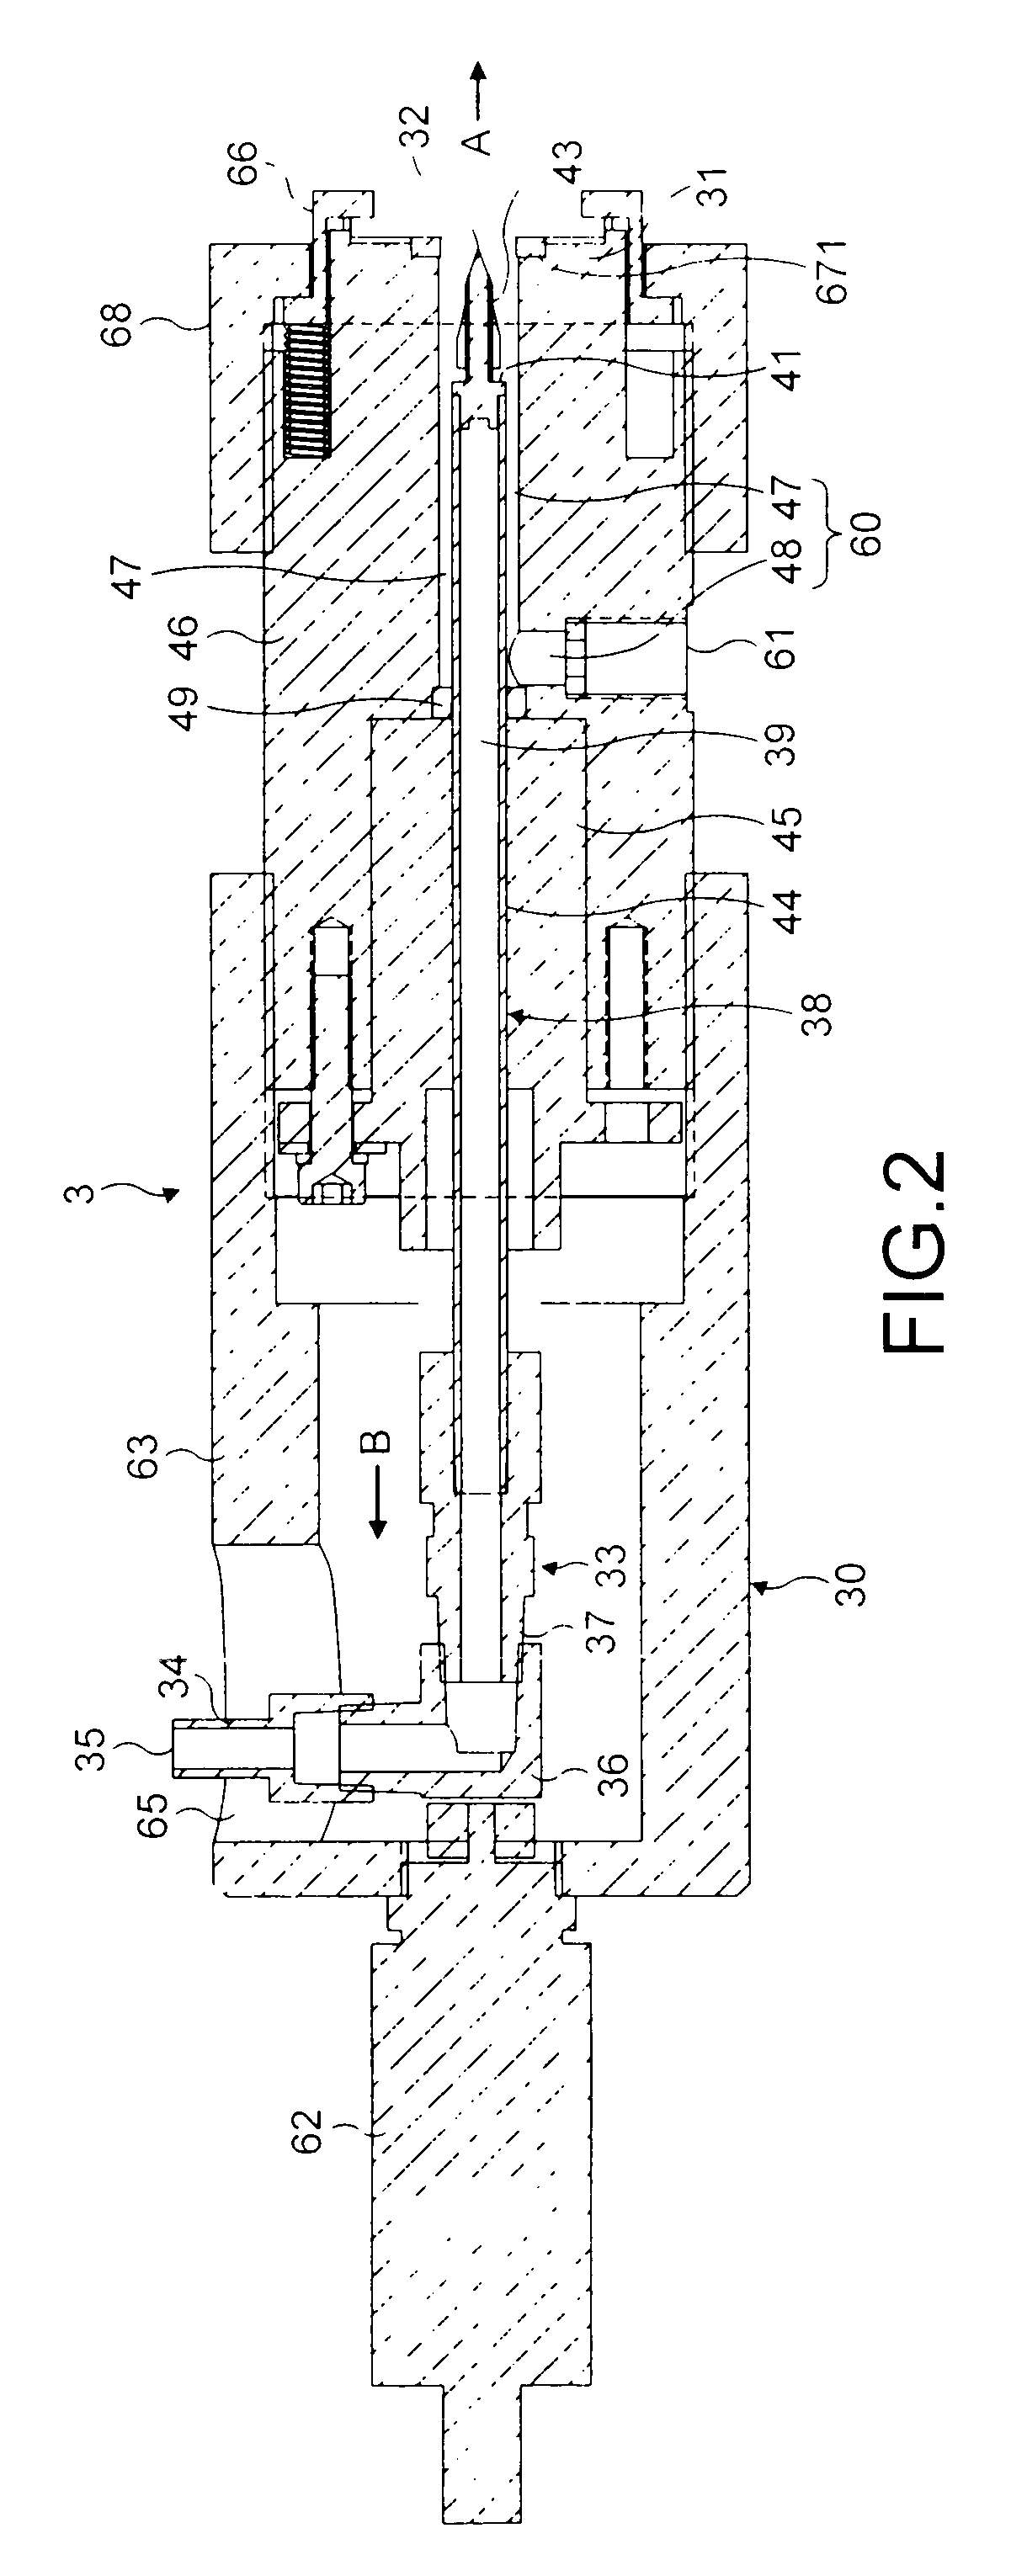 Sanitary manifold system and method for hygienically dispensing fluids